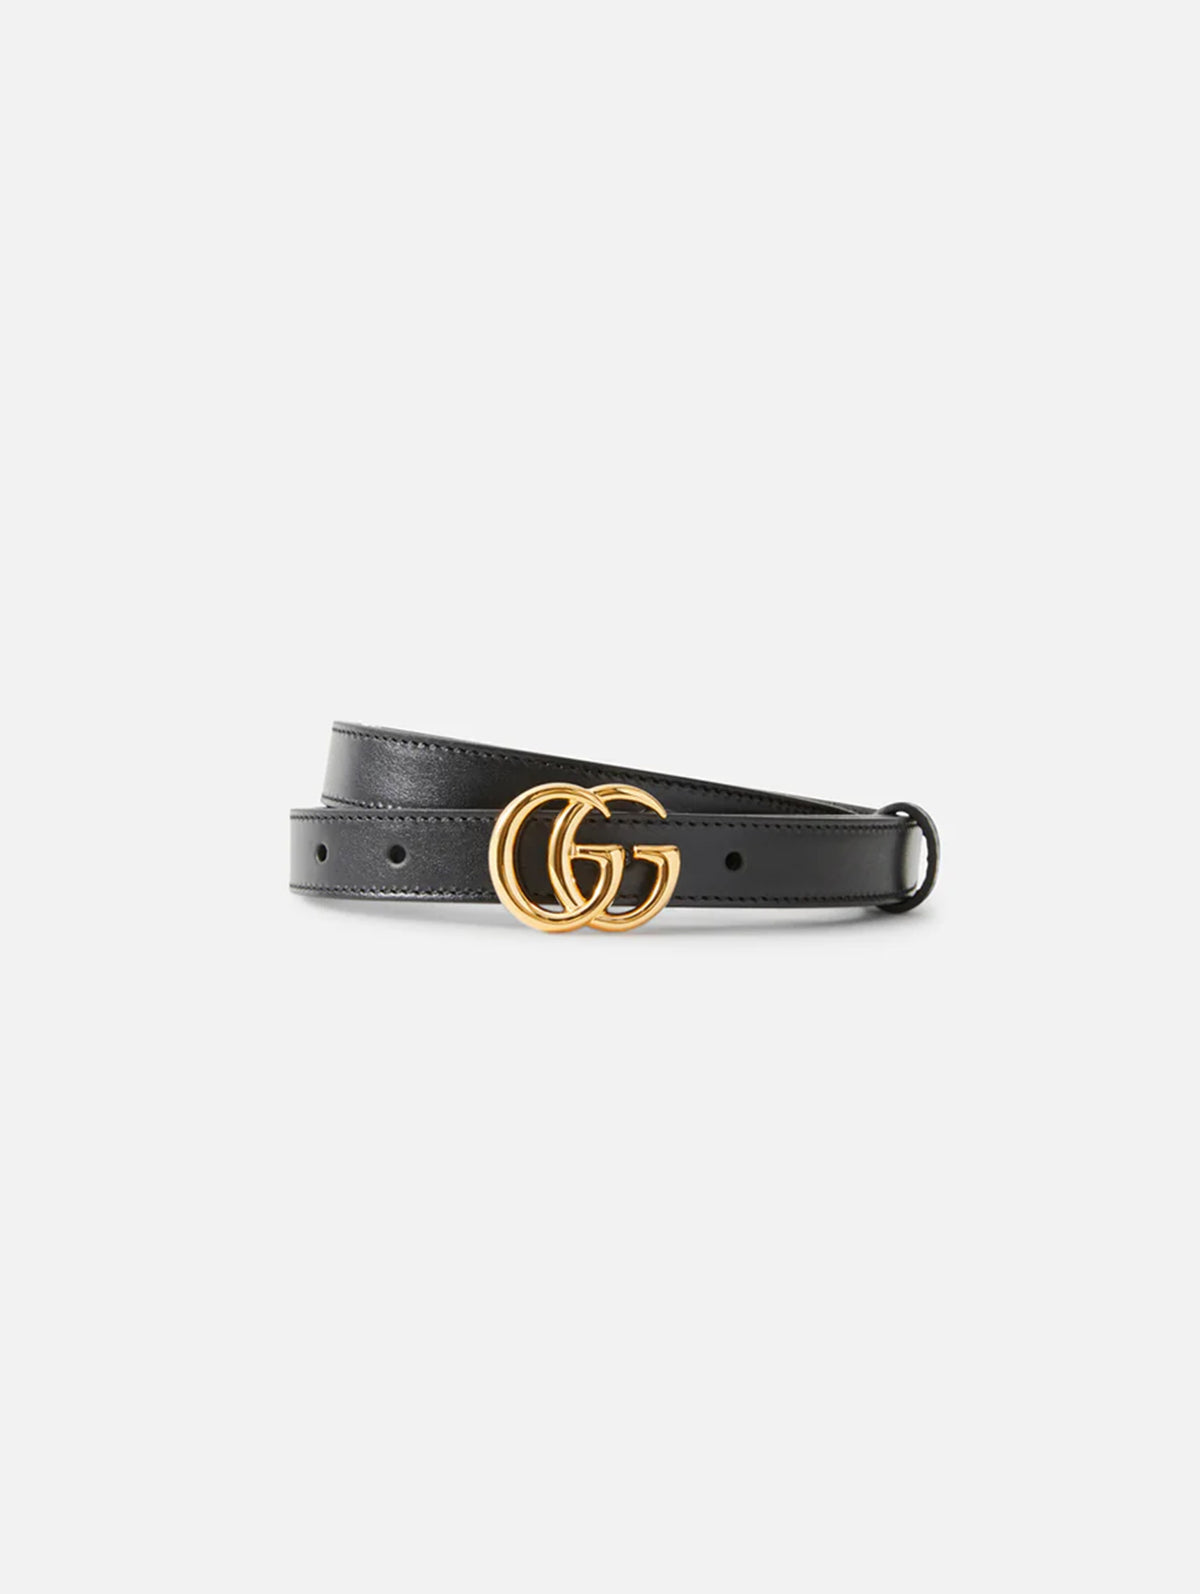 Thin Leather Belt with Double G Buckle